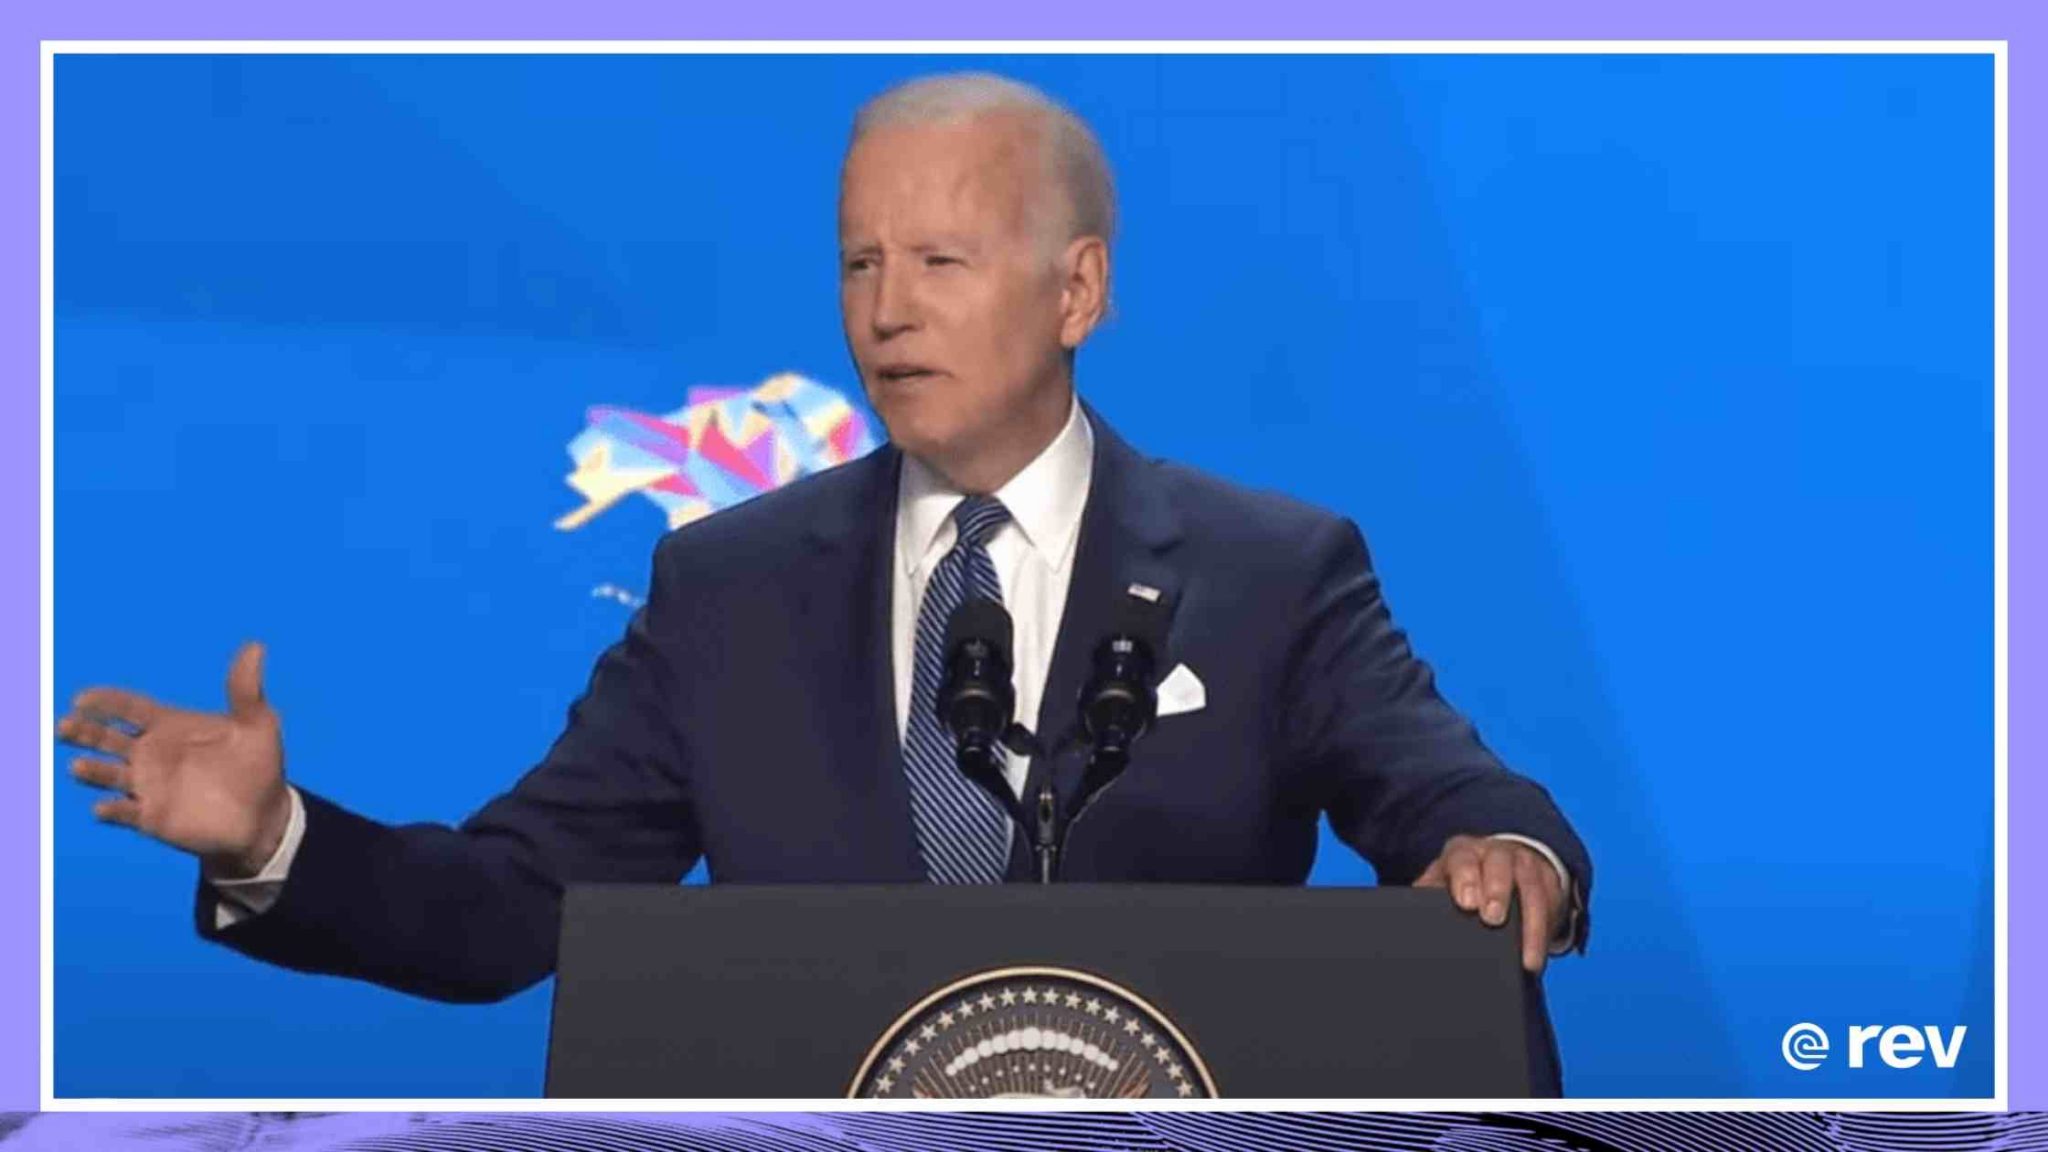 Biden deliver remarks at the inaugural ceremony of the 9th Summit of the Americas 6/08/22 Transcript